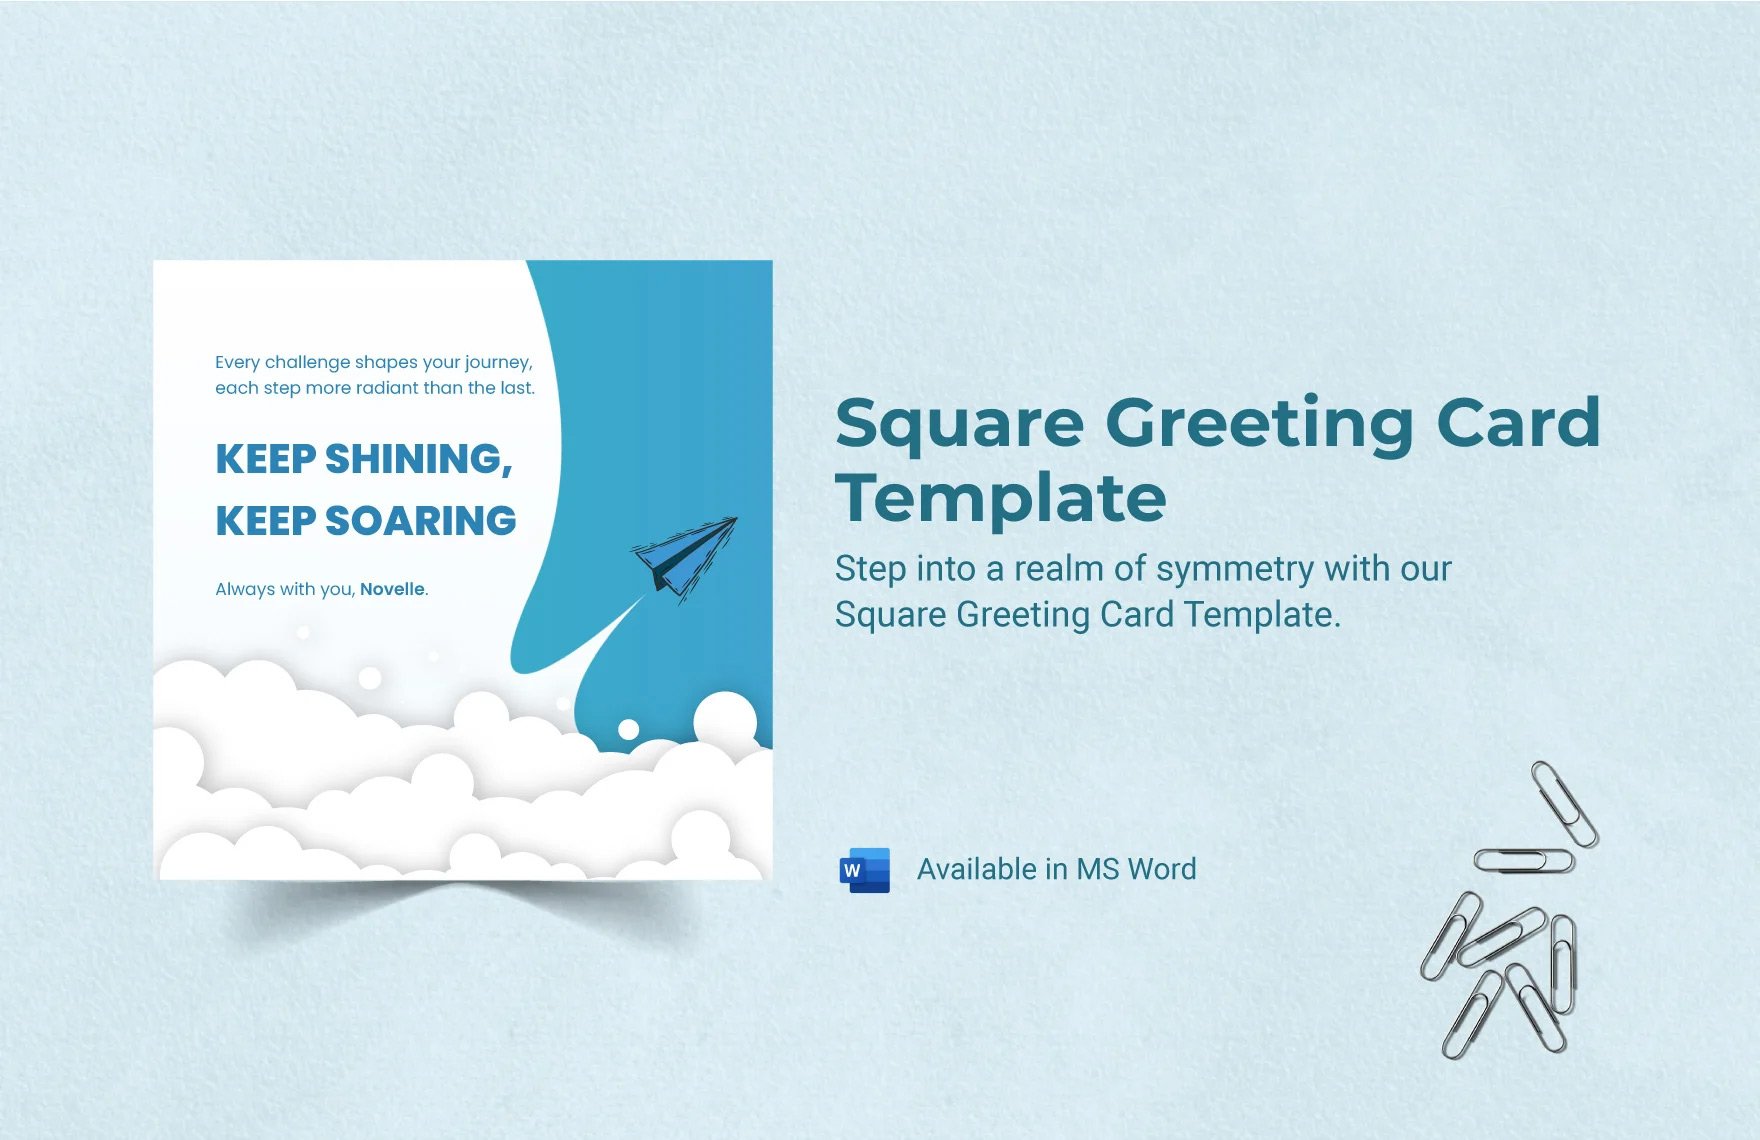 Square Greeting Card Template in Word